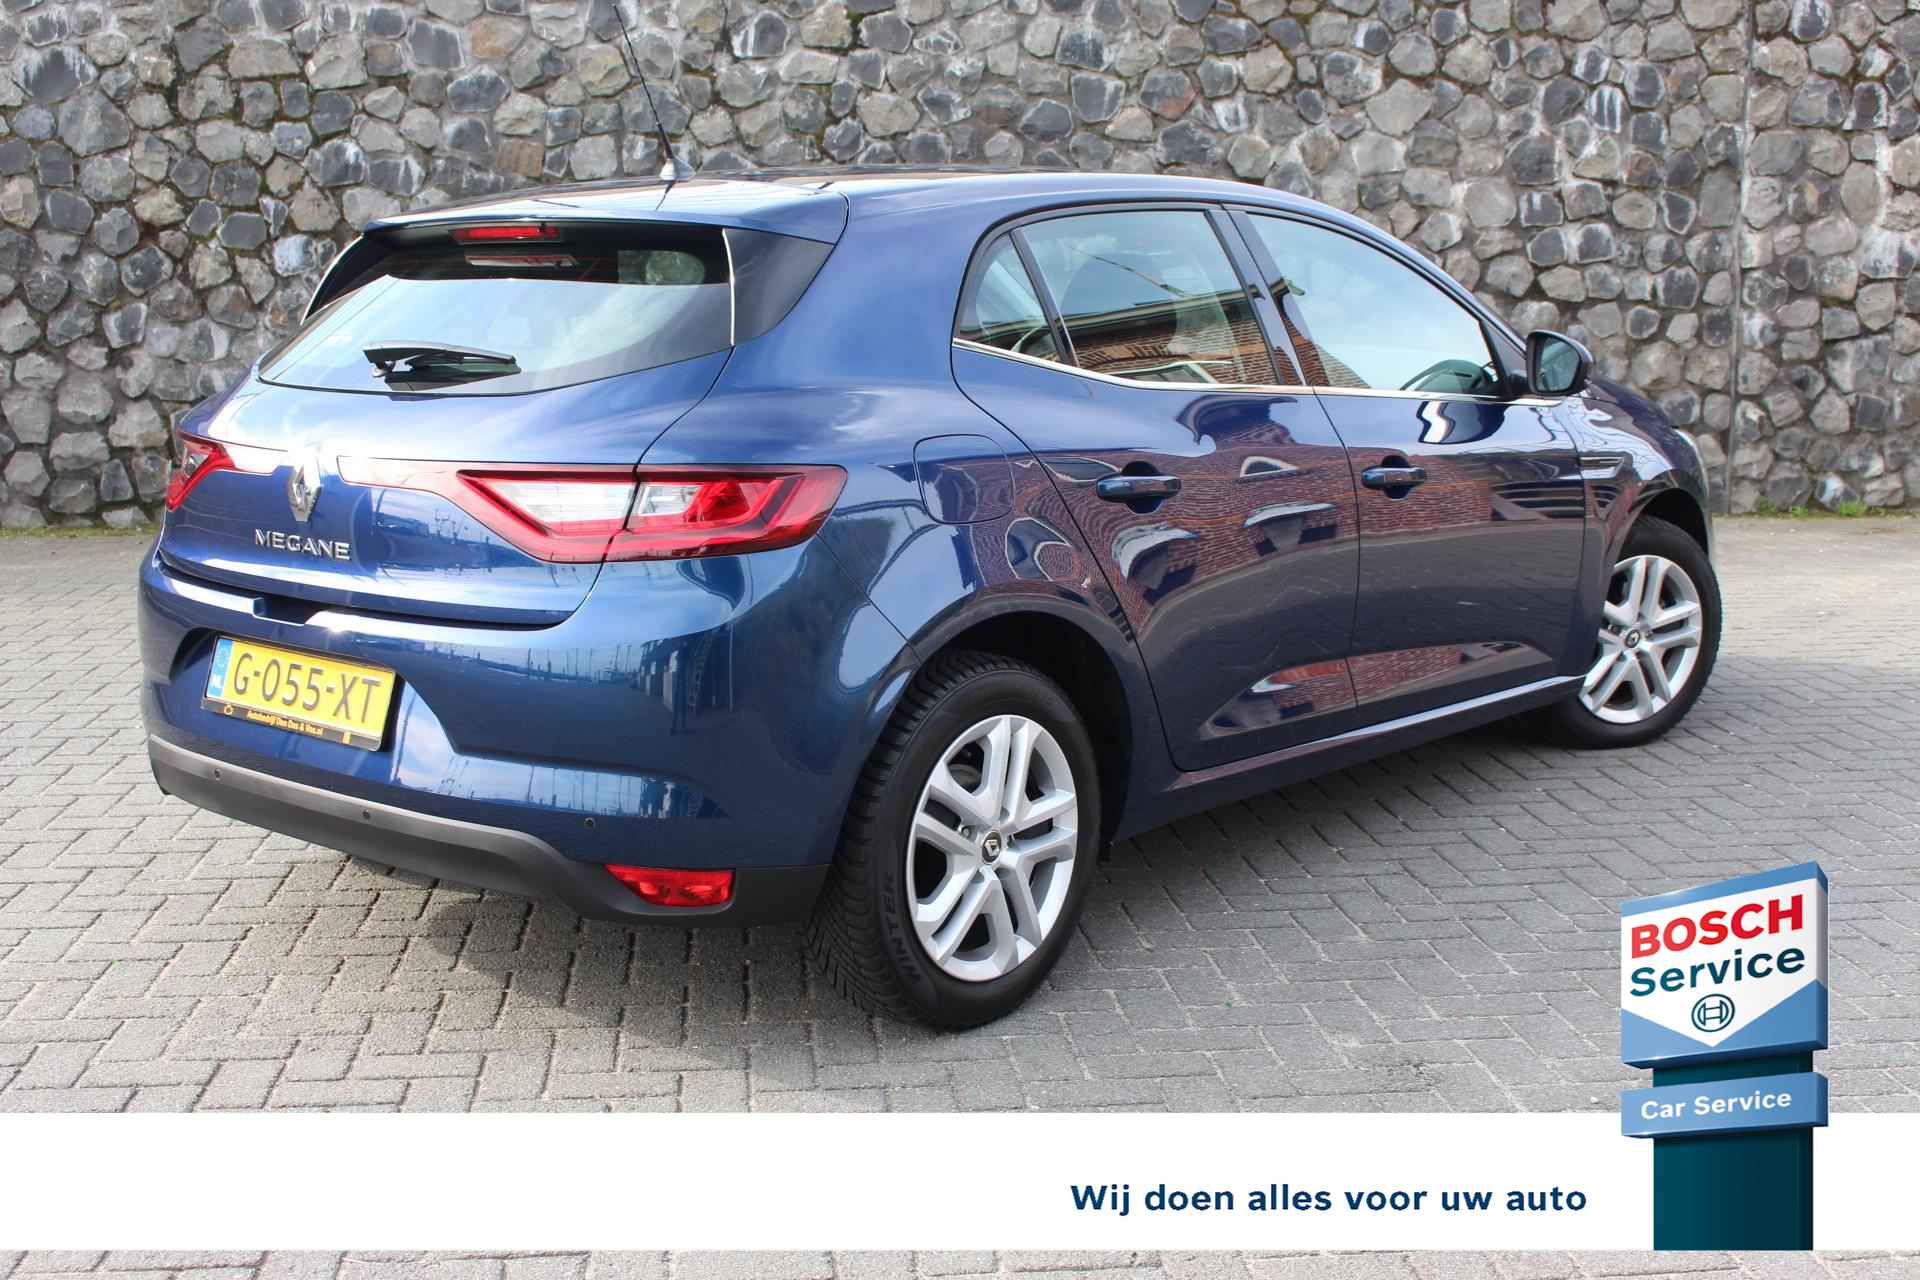 Renault Mégane 1.3 TCe Zen Dab+ audio Climate + cruise control Navi PDC achter Led verlichting voor + achter - 3/34